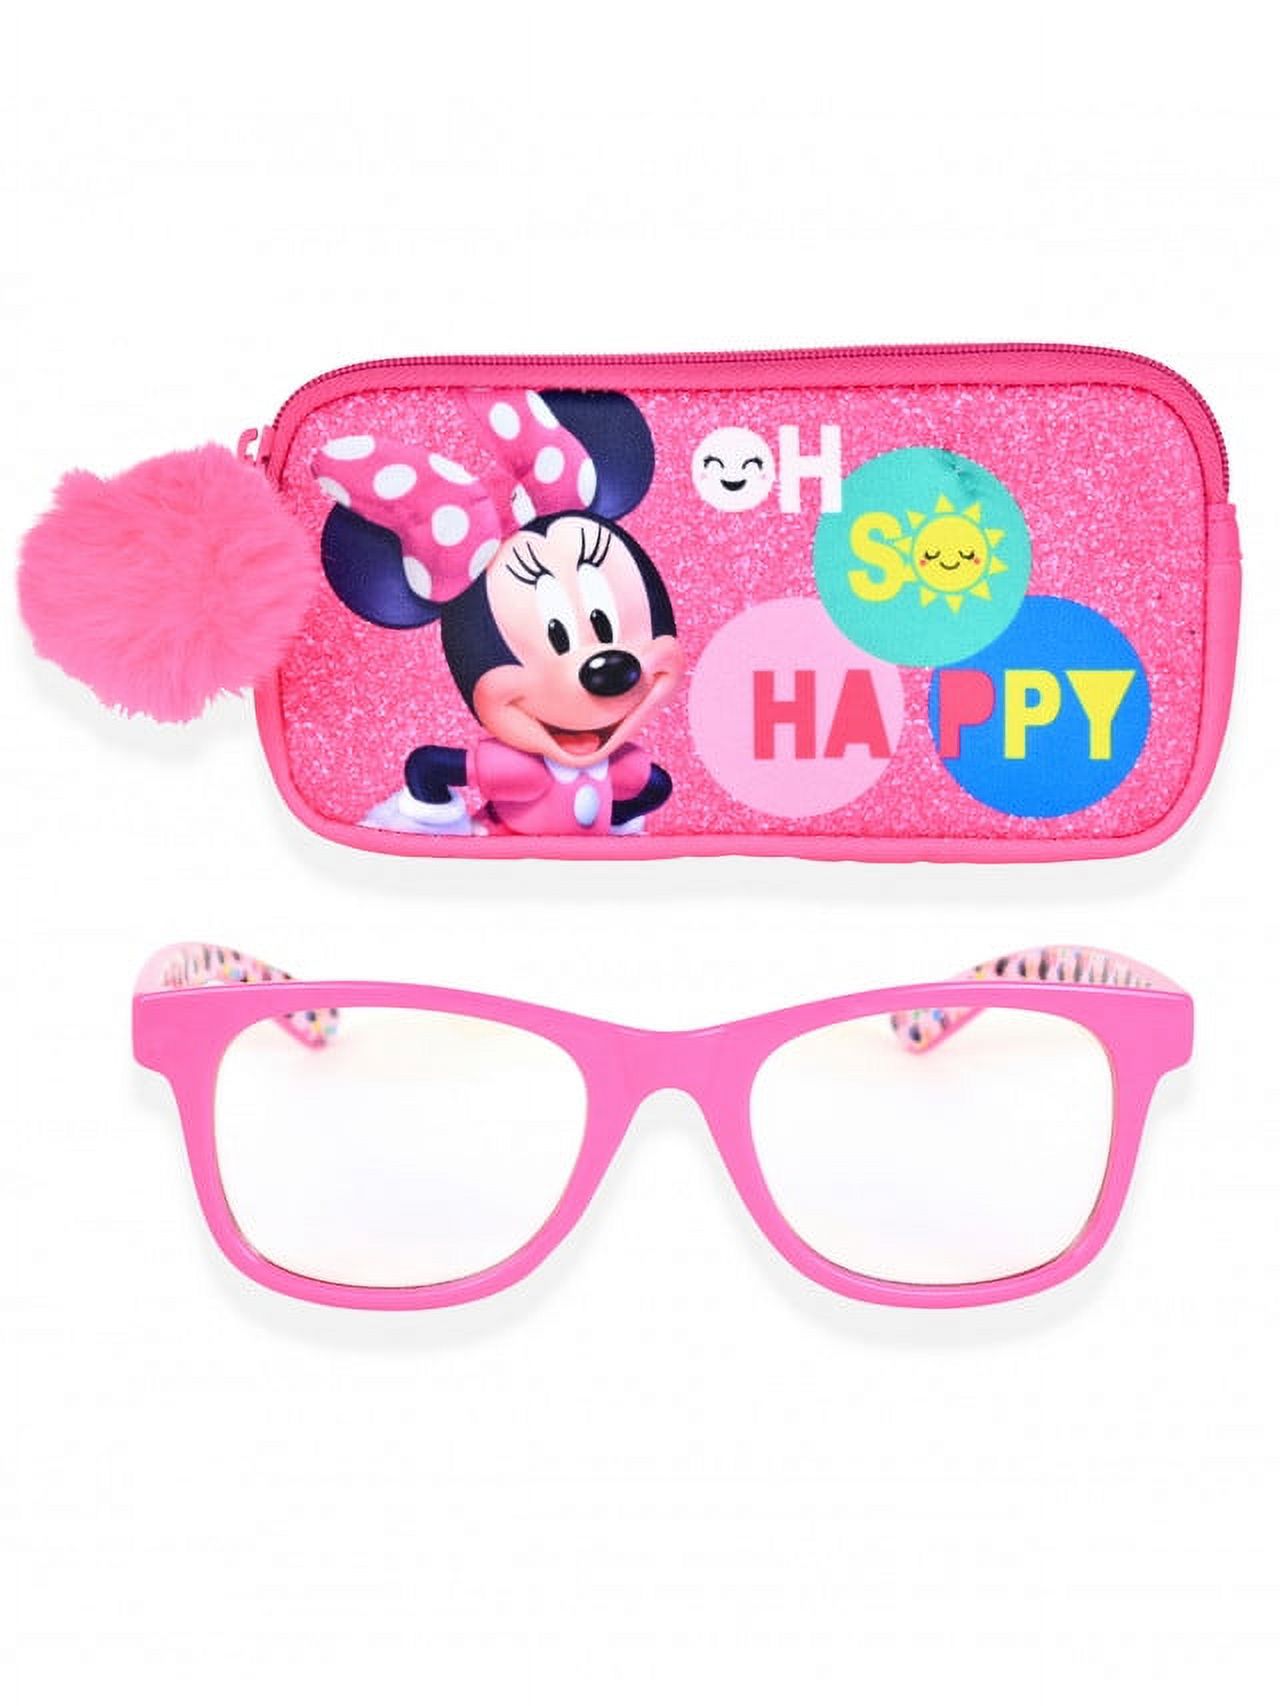 Minnie Mouse Blue Light Blocking Glasses for Boys with Zippered Case - image 1 of 5